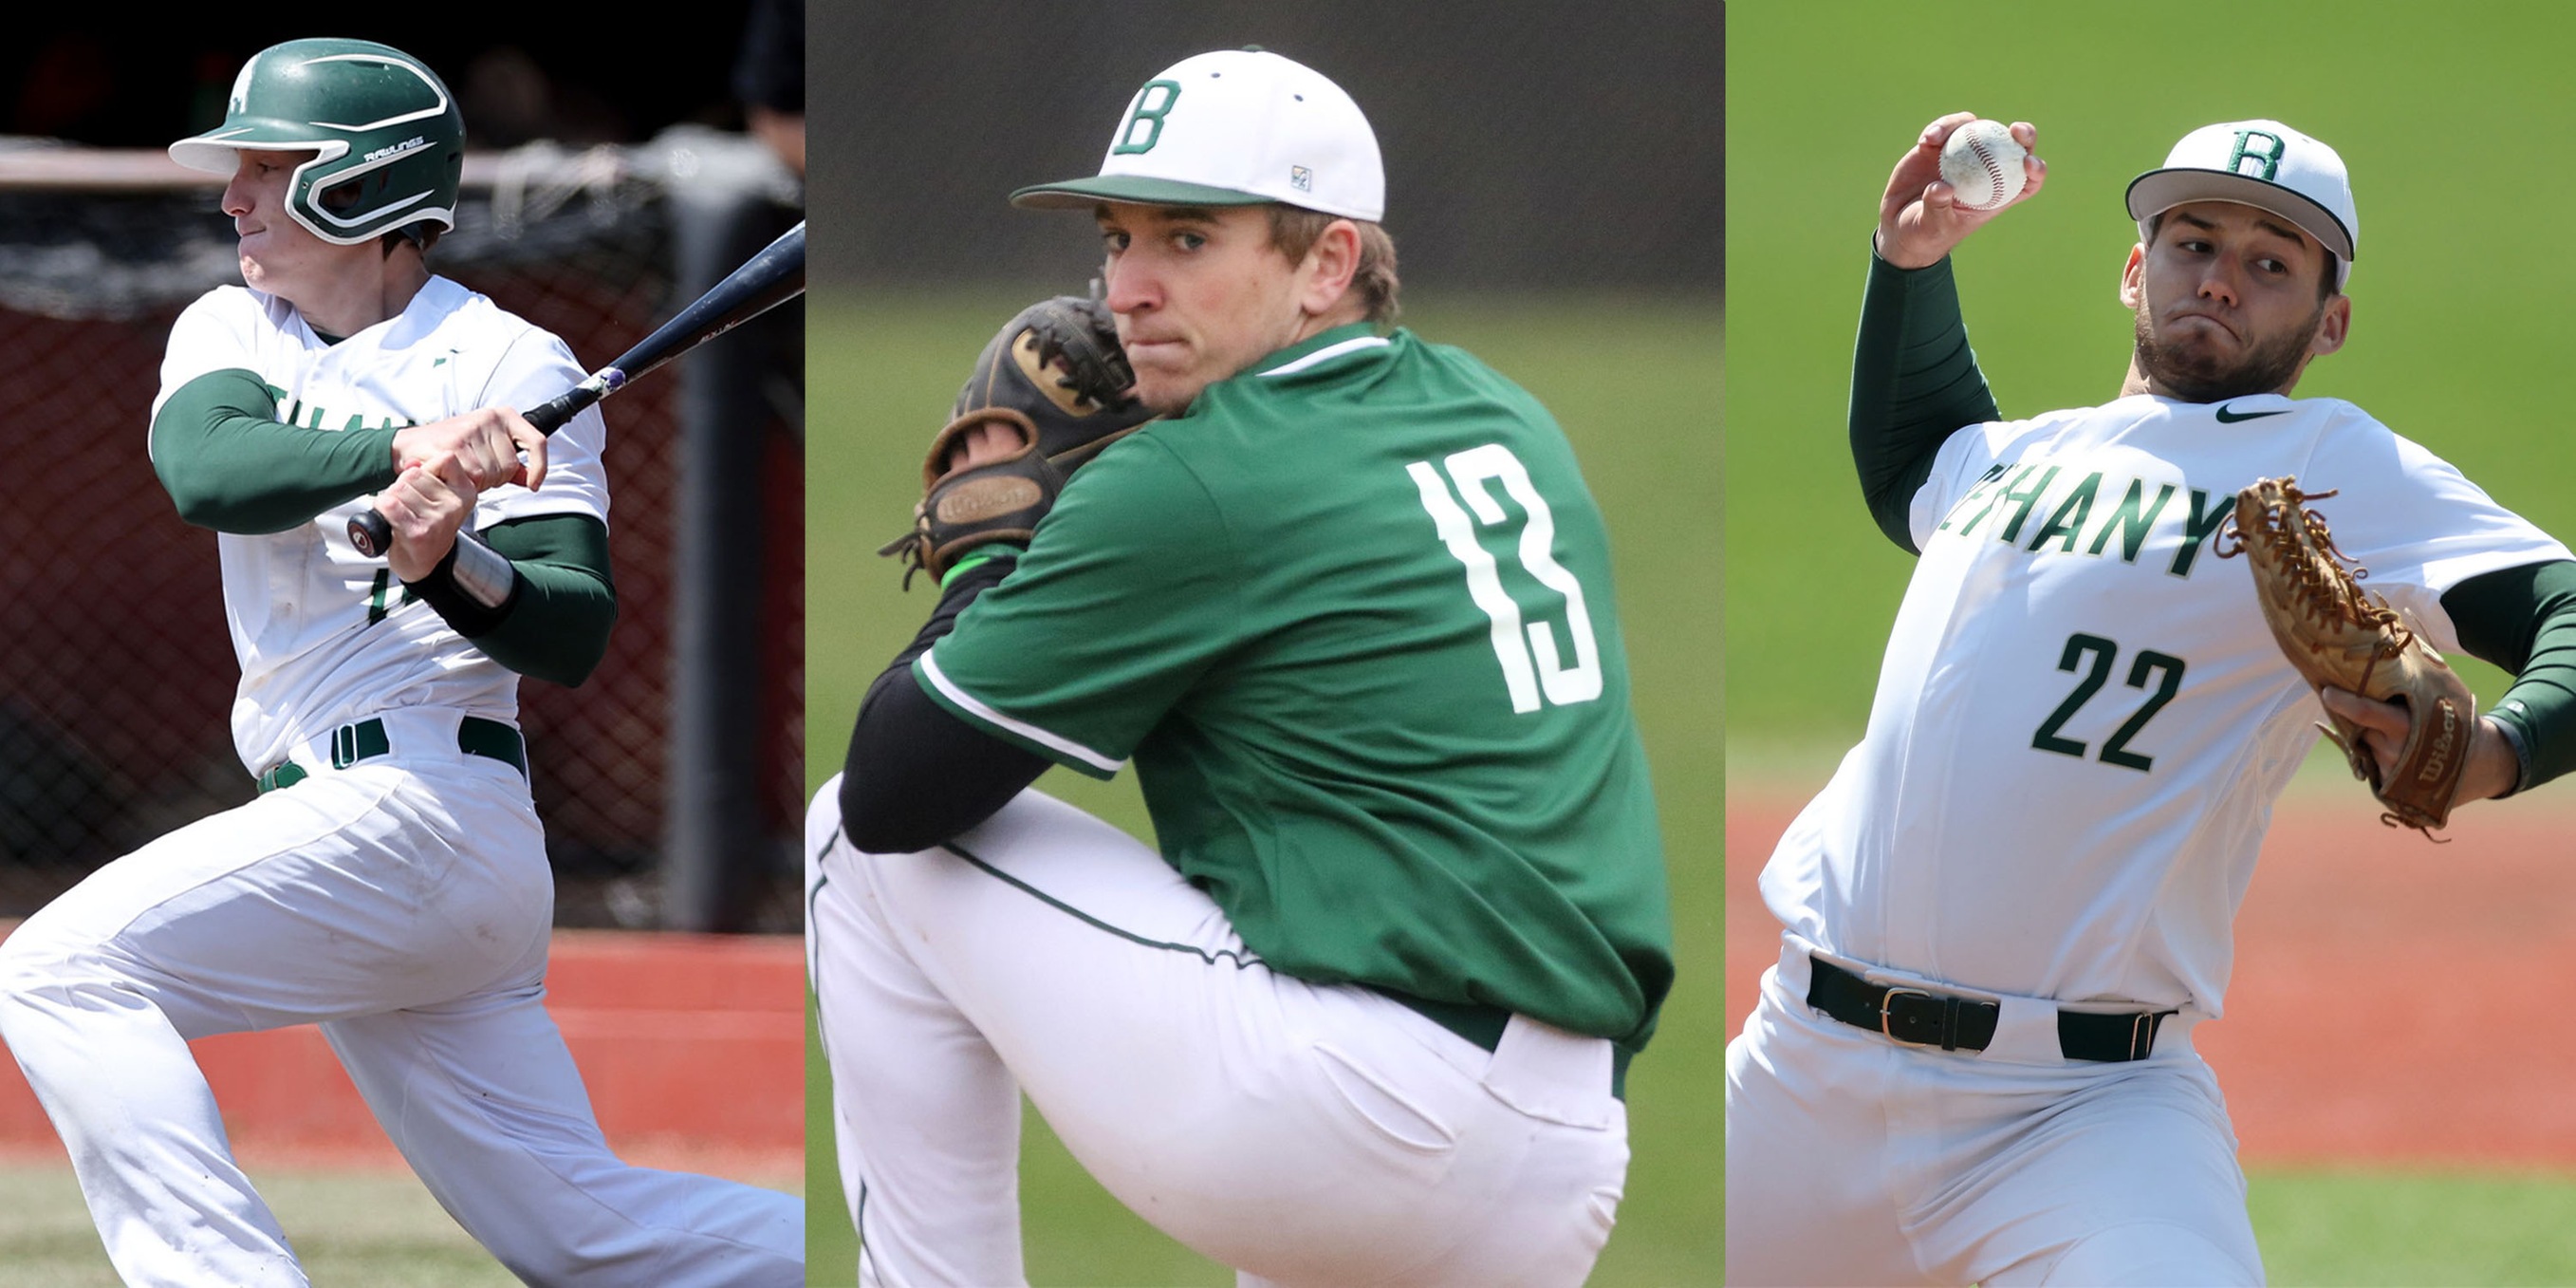 Baseball: Three Bison Earned All-PAC Honors